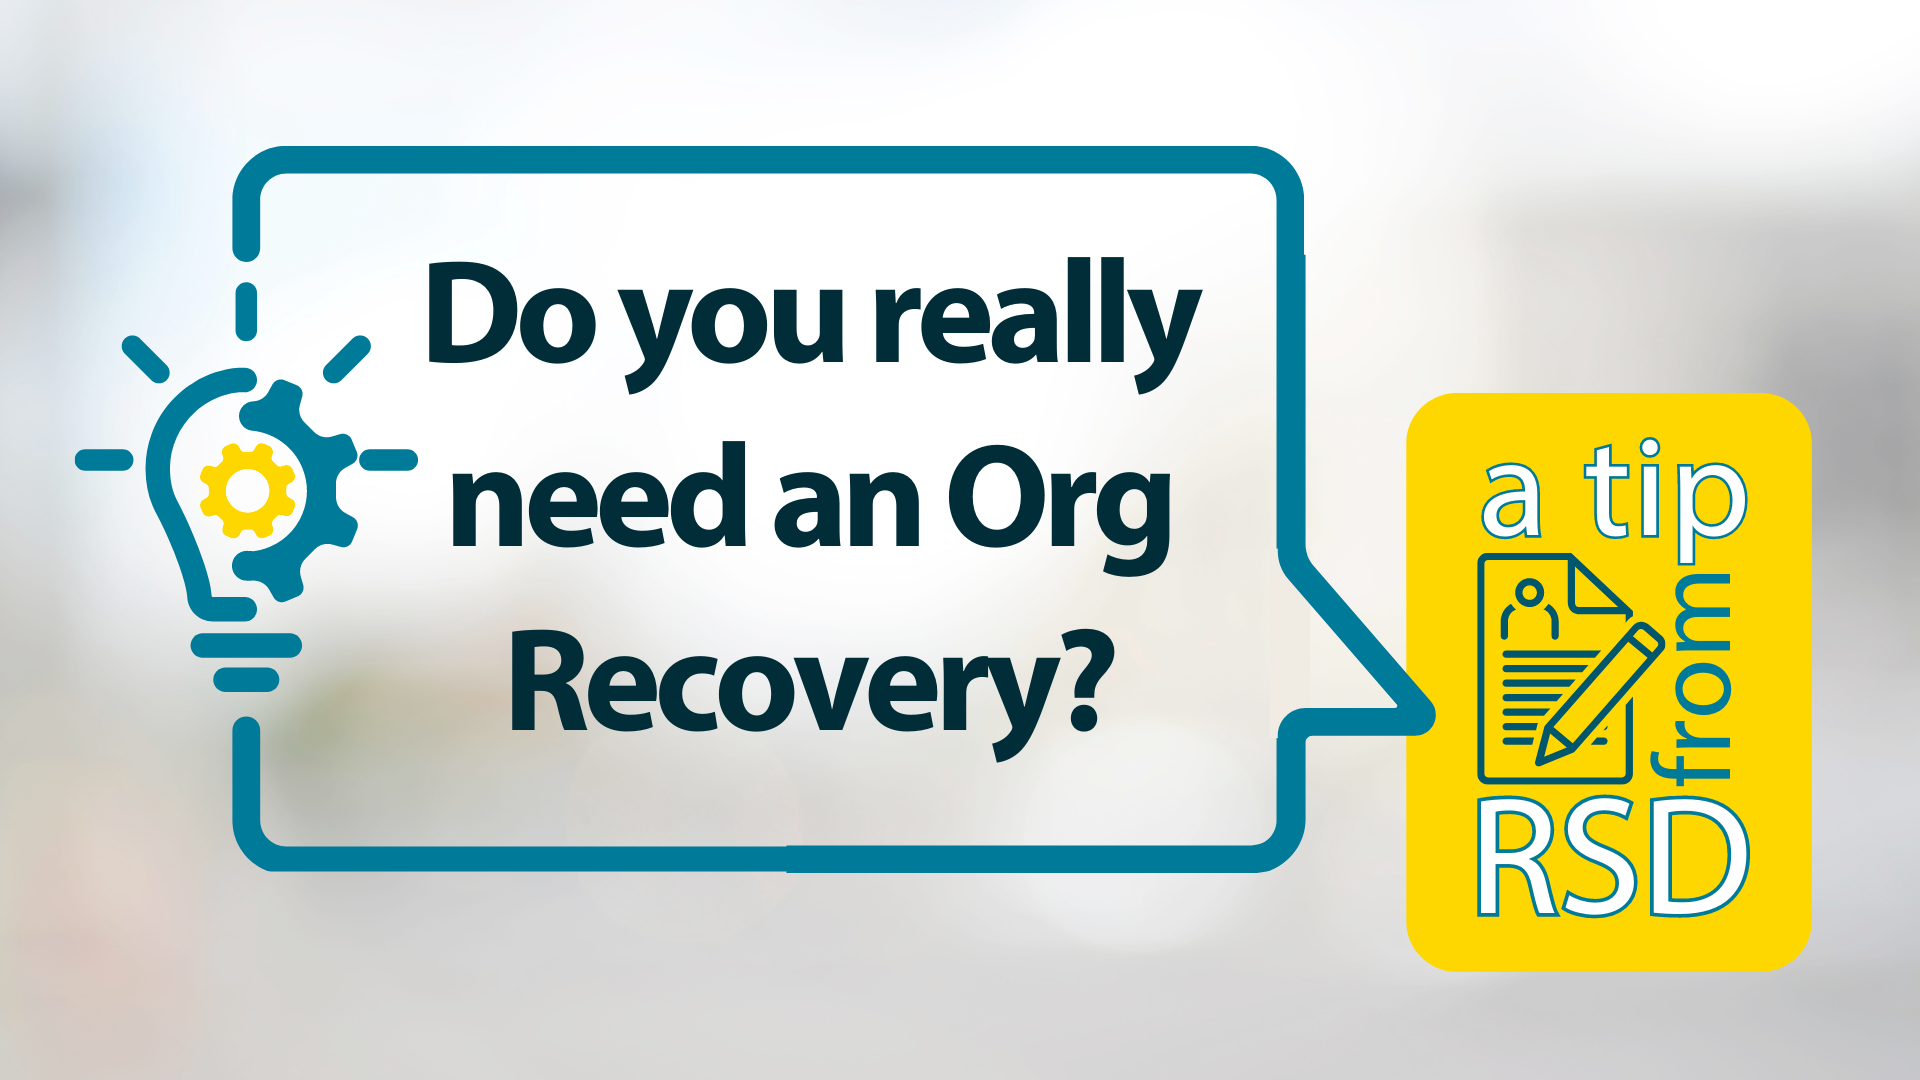 Do You Really Need an Org Recovery?